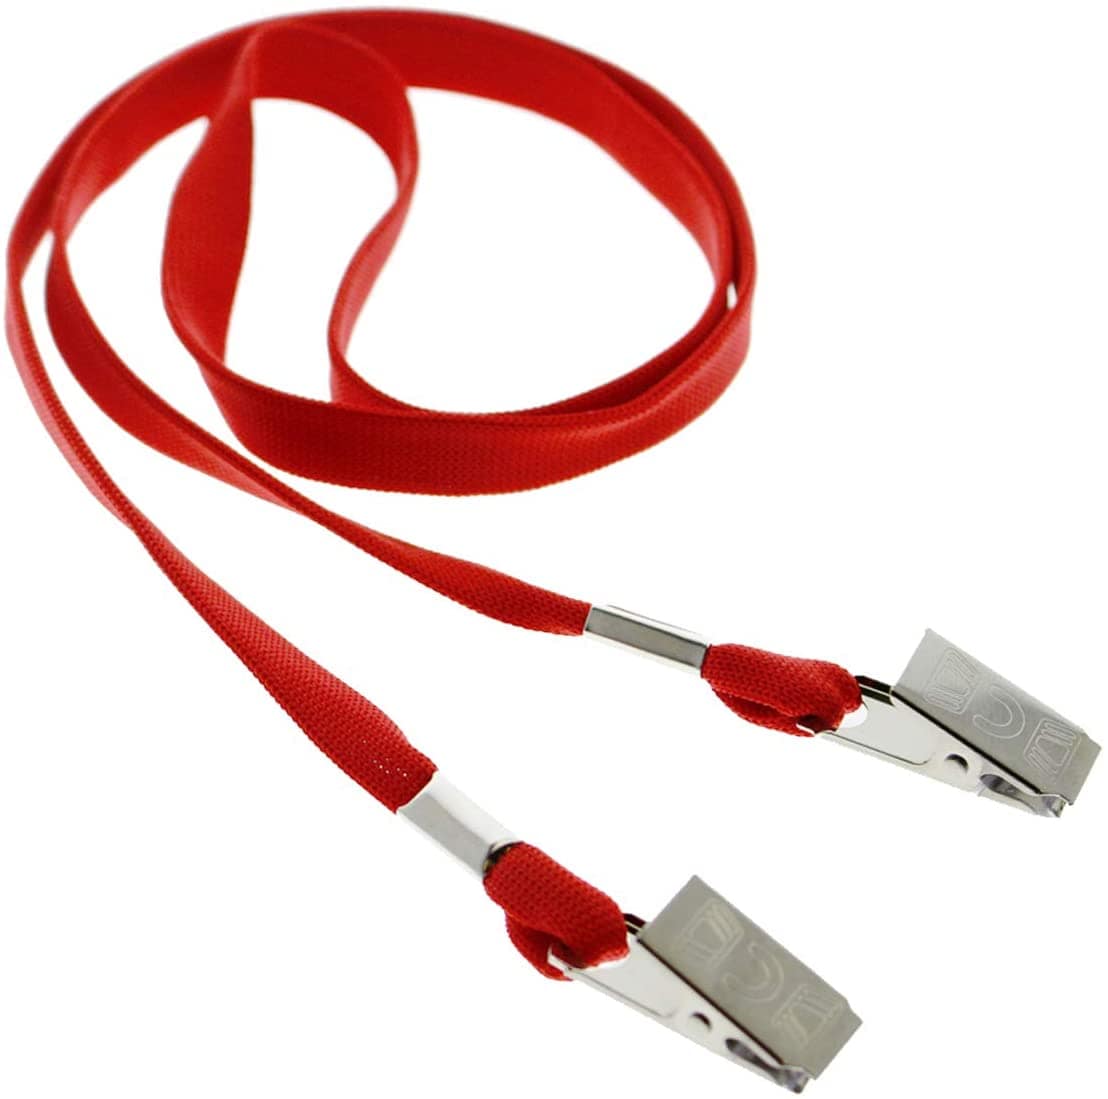 Lanyards with Open-Ended Clips 10 Qty